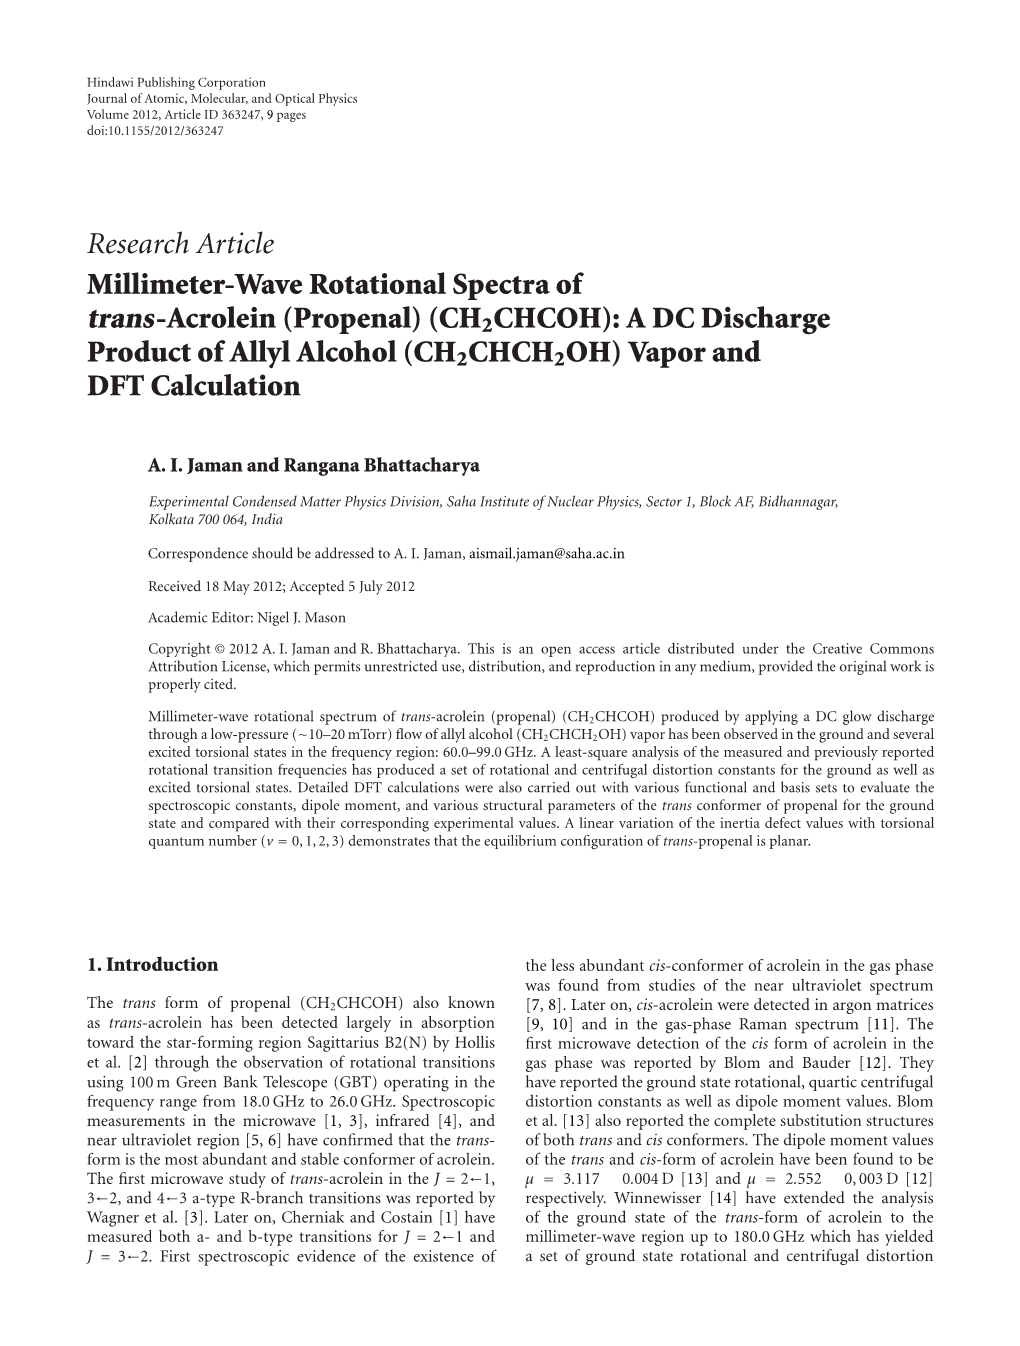 Millimeter-Wave Rotational Spectra of Trans-Acrolein (Propenal) (CH2CHCOH):Adcdischarge Product of Allyl Alcohol (CH2CHCH2OH) Vapor and DFT Calculation